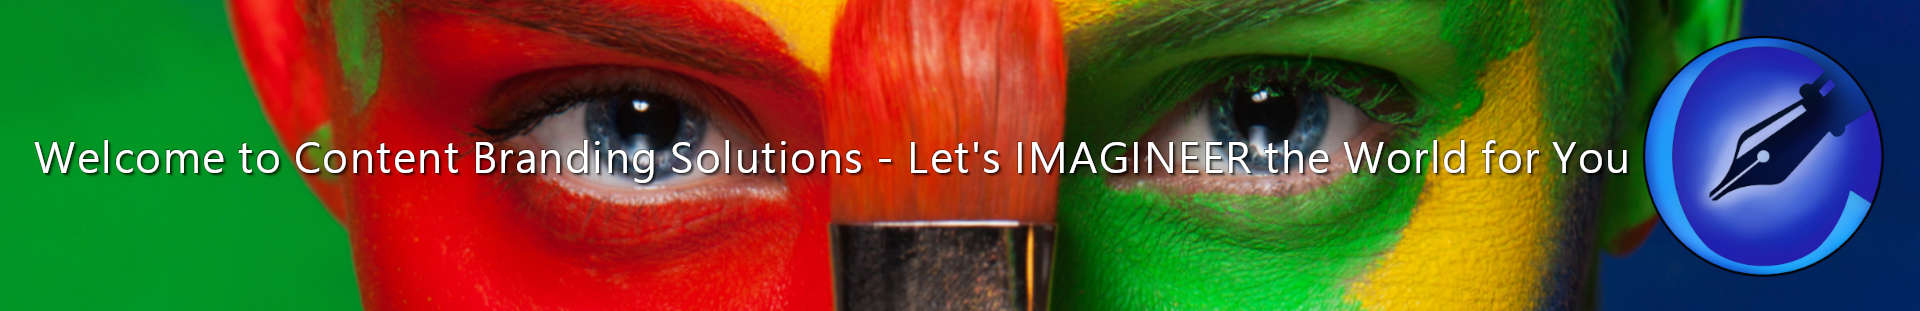 Welcome to Content Branding Solutions - Let's IMAGINEER the World for You